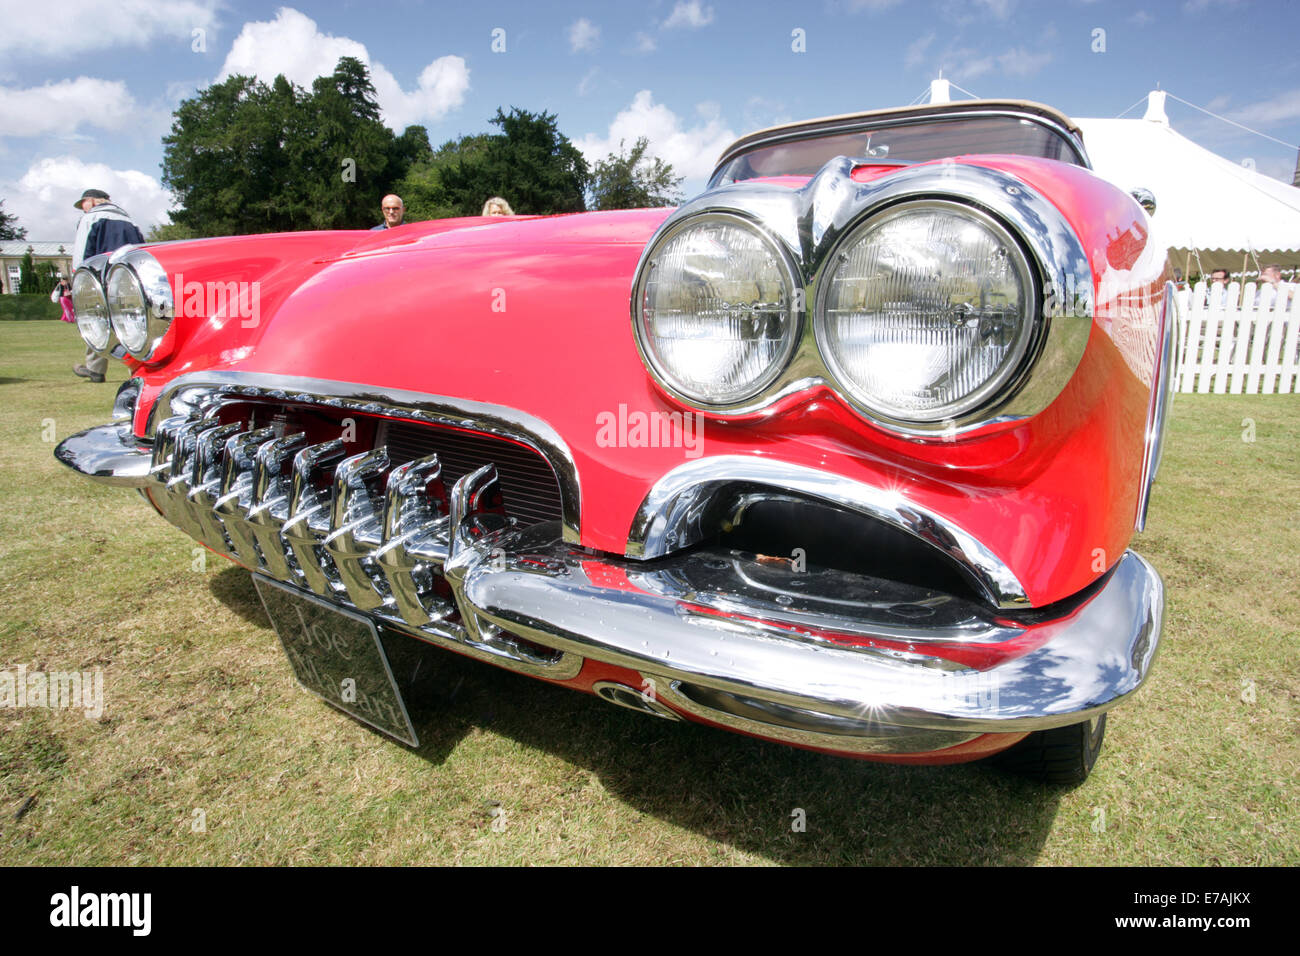 A 1959 Chevrolet Corvette at a classic car show in the south of England 2014 Stock Photo